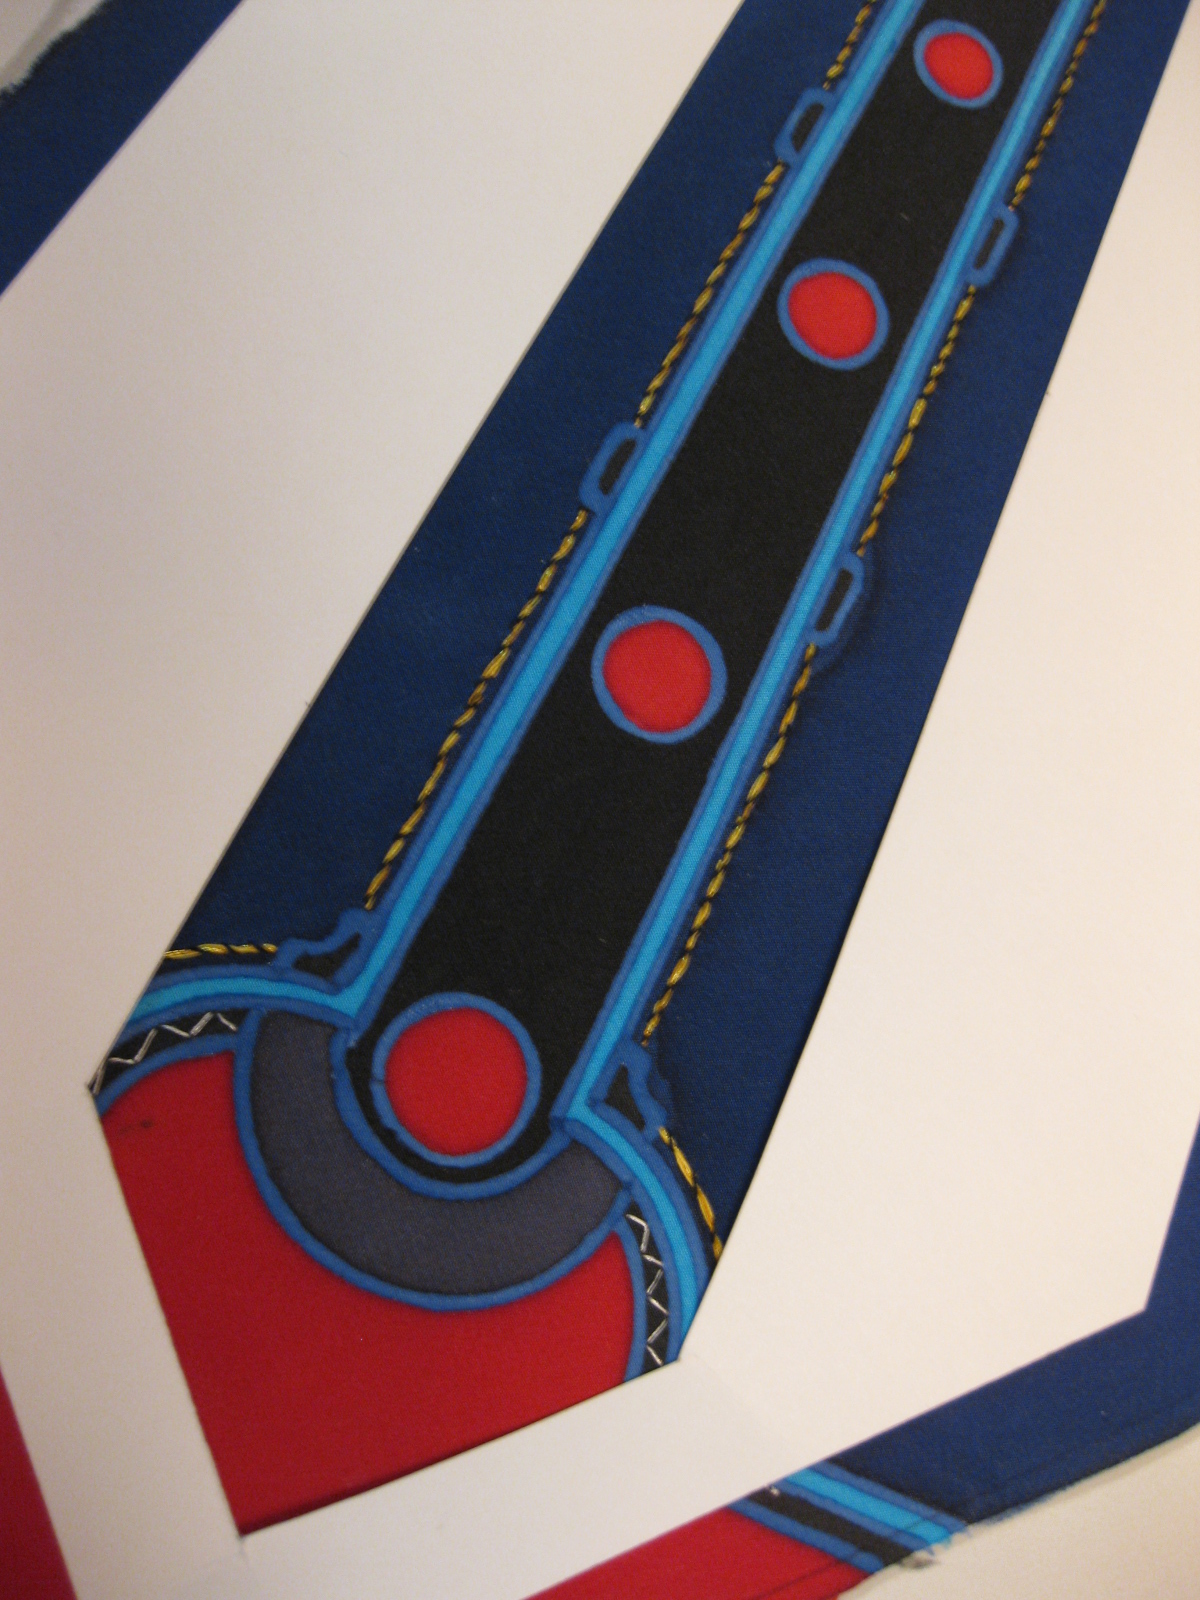 The Art of Neckwear: 
Hand-painted, Hand-embroidered, Handmade.
Art Deco inspired